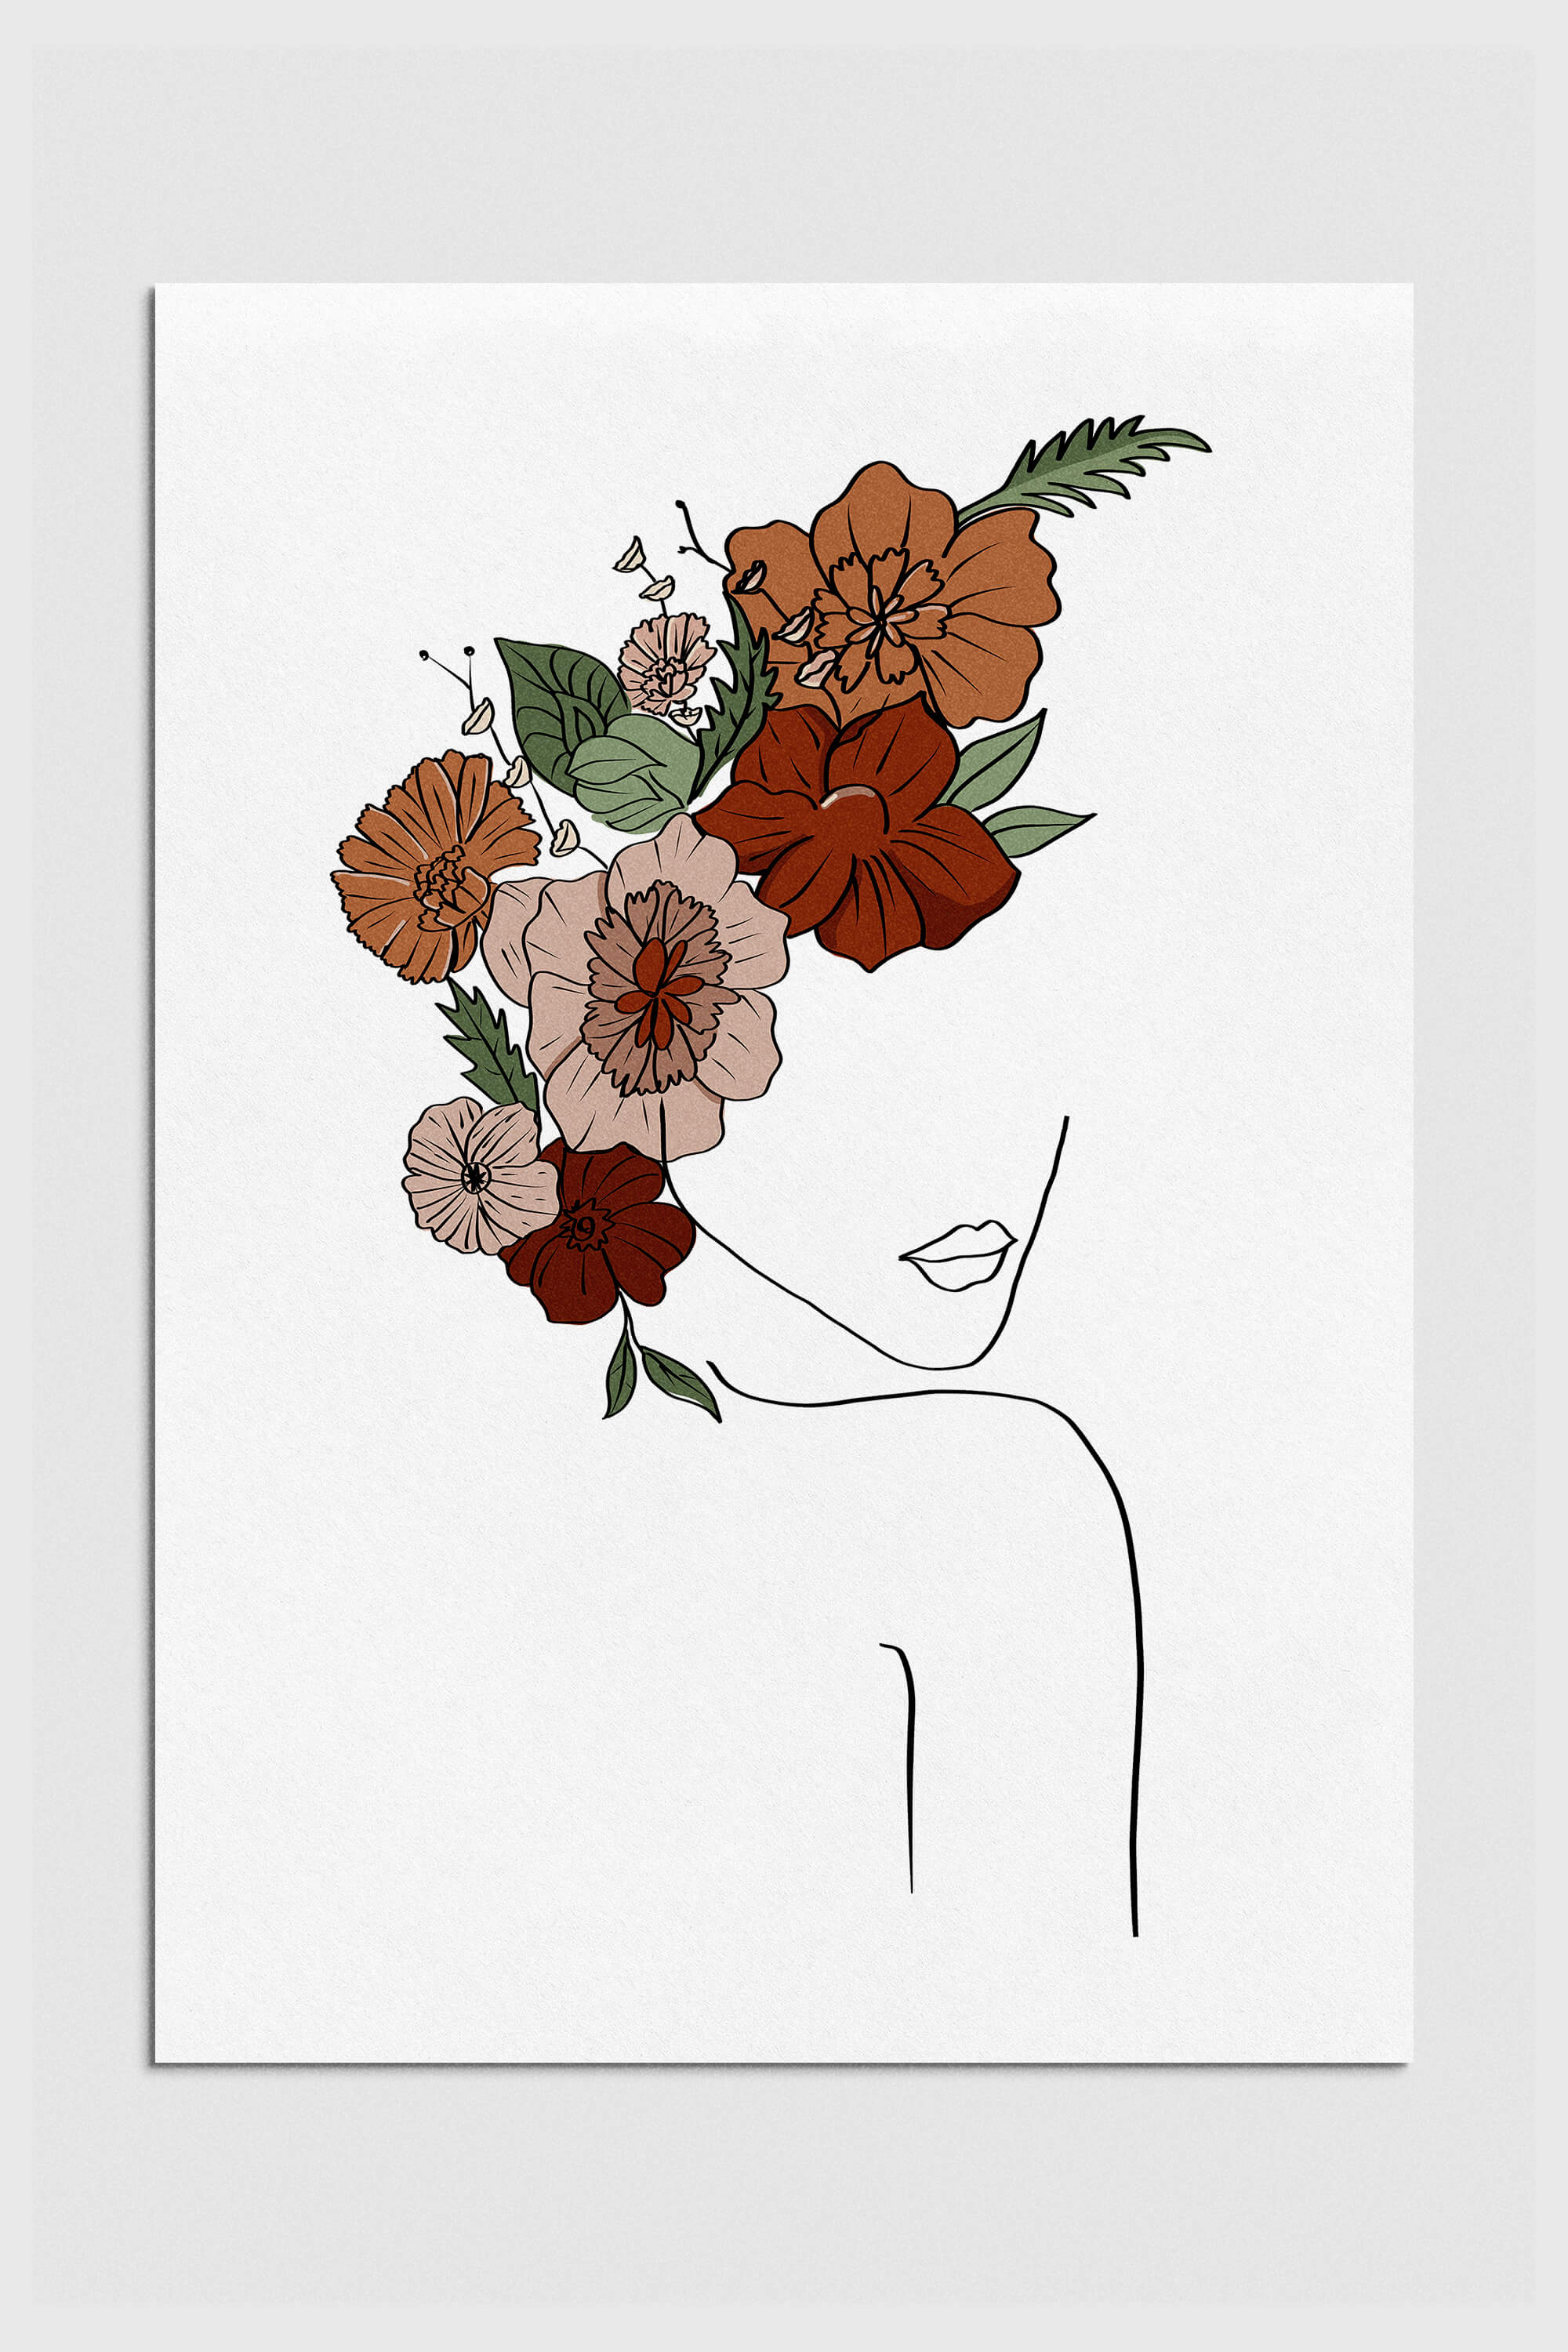 Enigmatic woman with floral head wall art